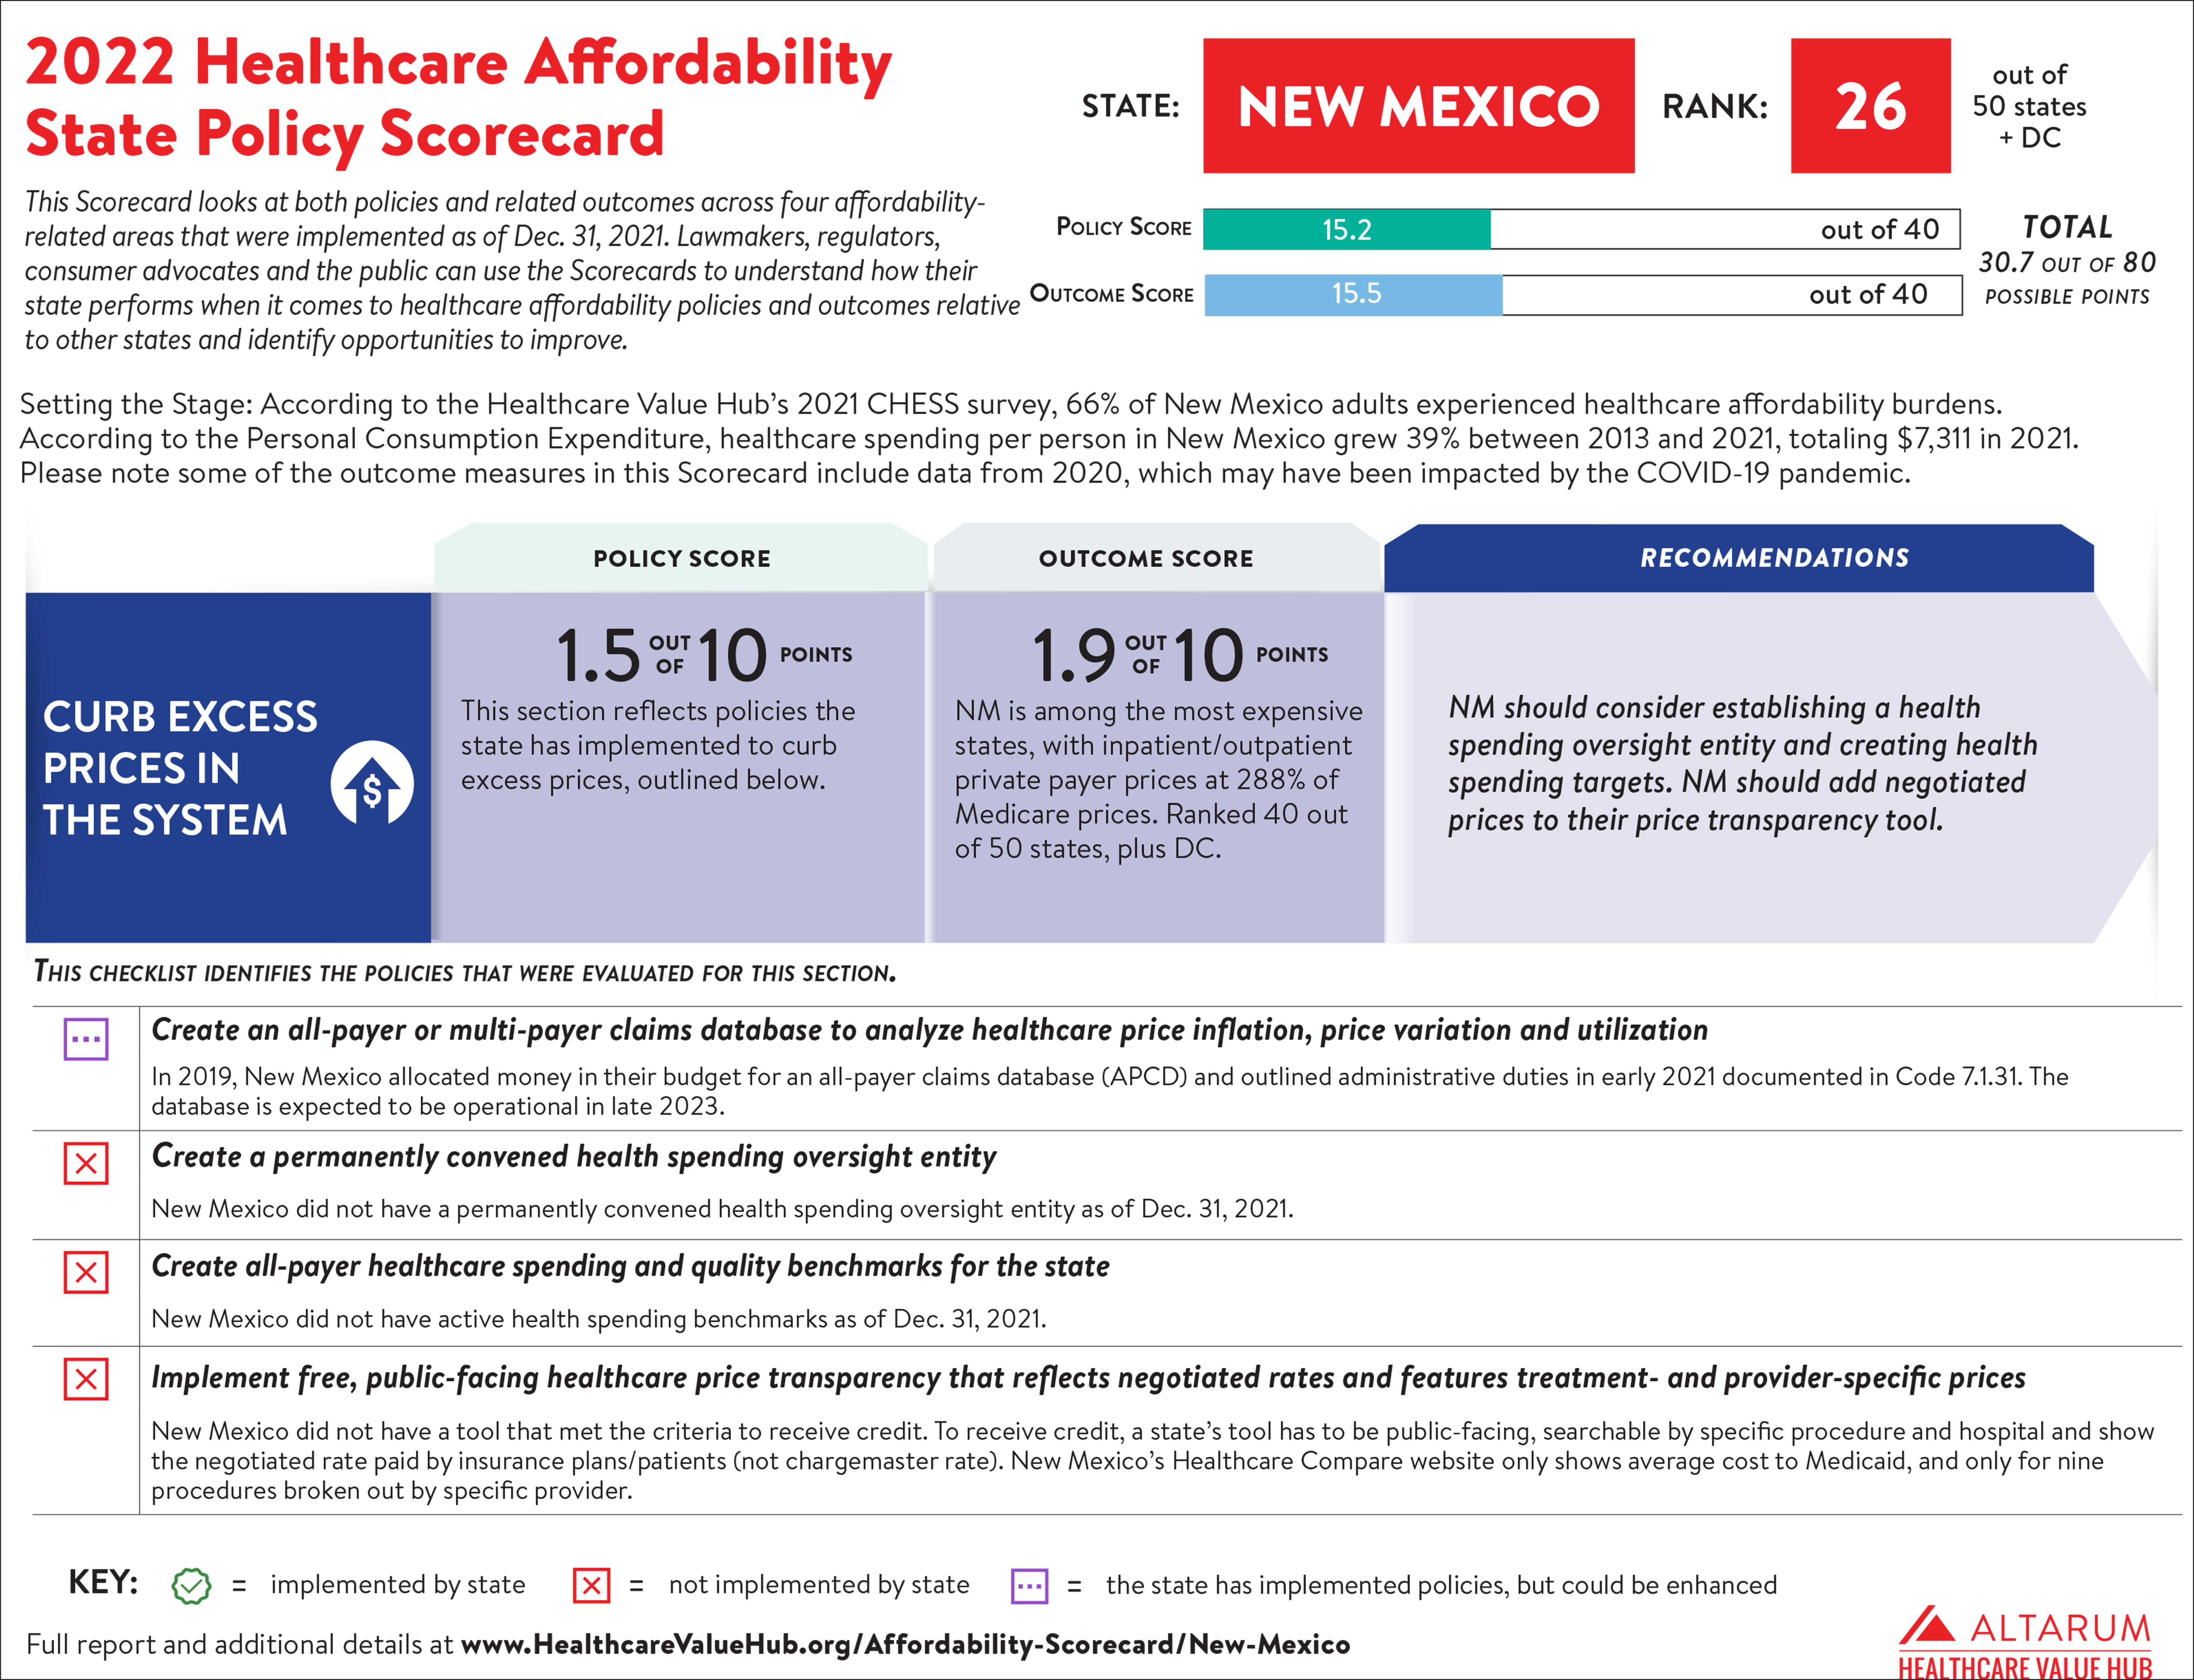 New Mexico 2022 Scorecard PNG 7000.png